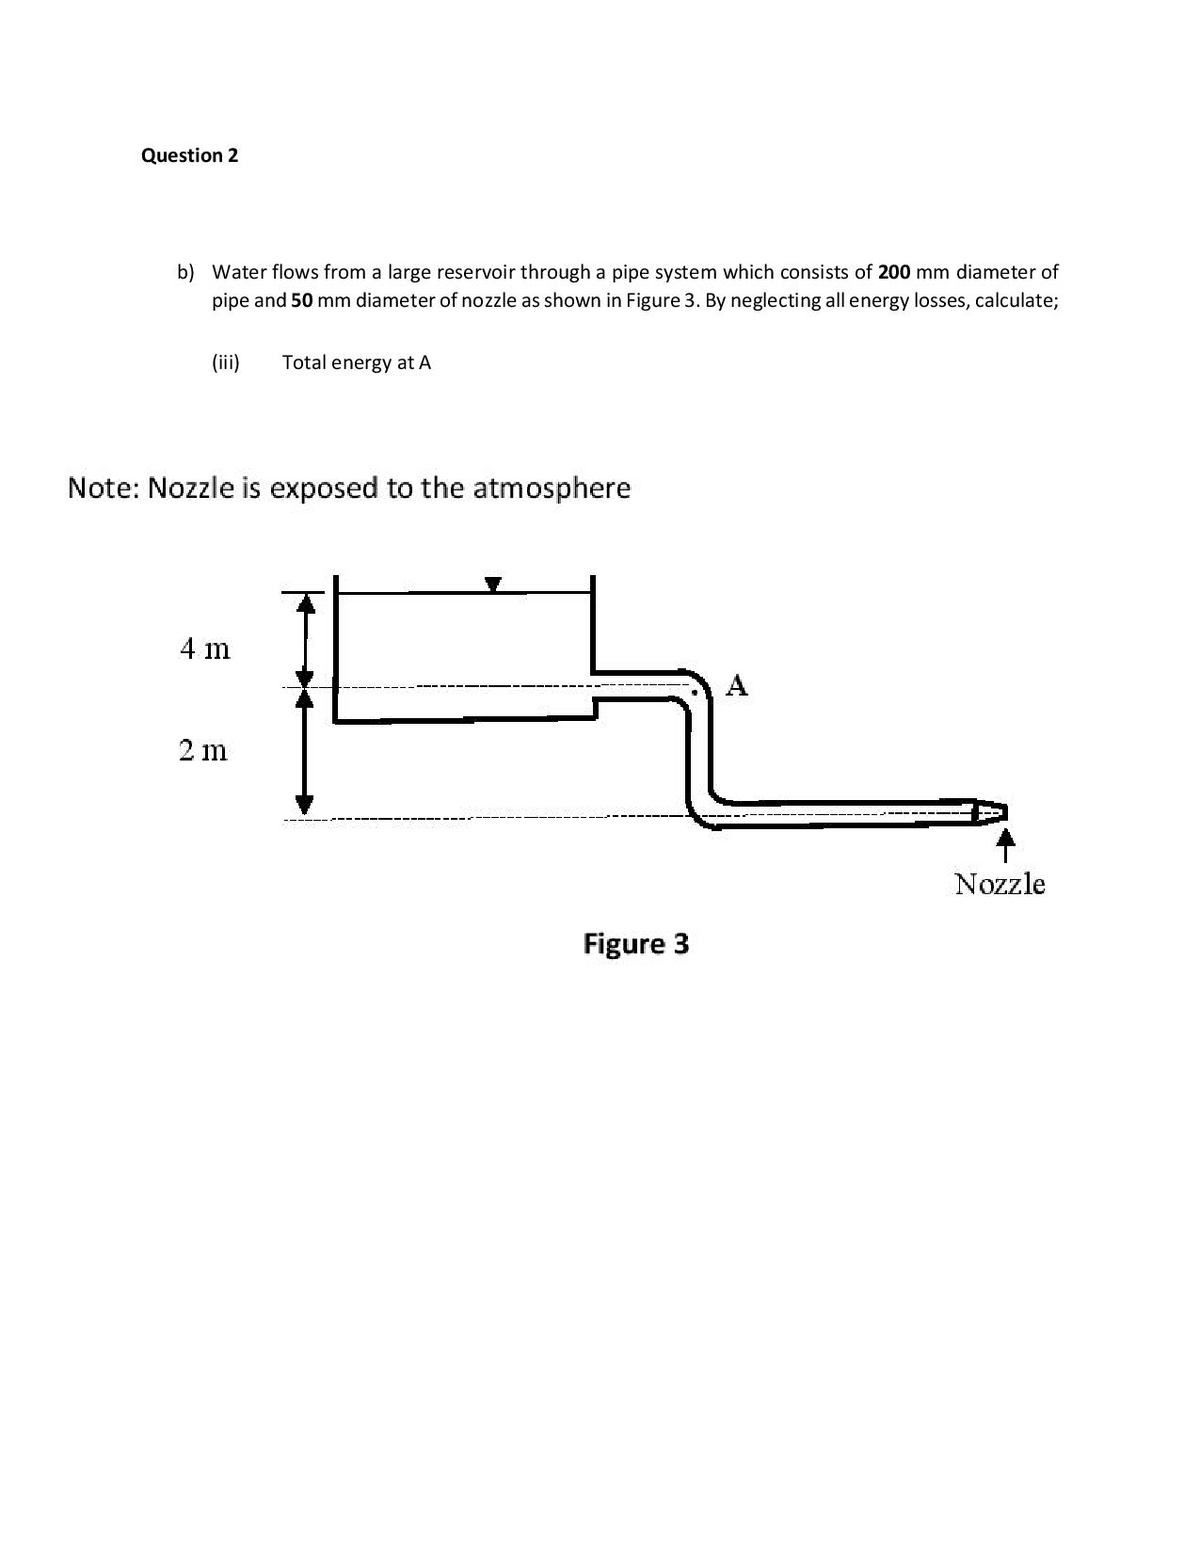 Question 2
b) Water flows from a large reservoir through a pipe system which consists of 200 mm diameter of
pipe and 50 mm diameter of nozzle as shown in Figure 3. By neglecting all energy losses, calculate;
(iii)
Total energy at A
Note: Nozzle is exposed to the atmosphere
4 m
A
2 m
Nozzle
Figure 3
